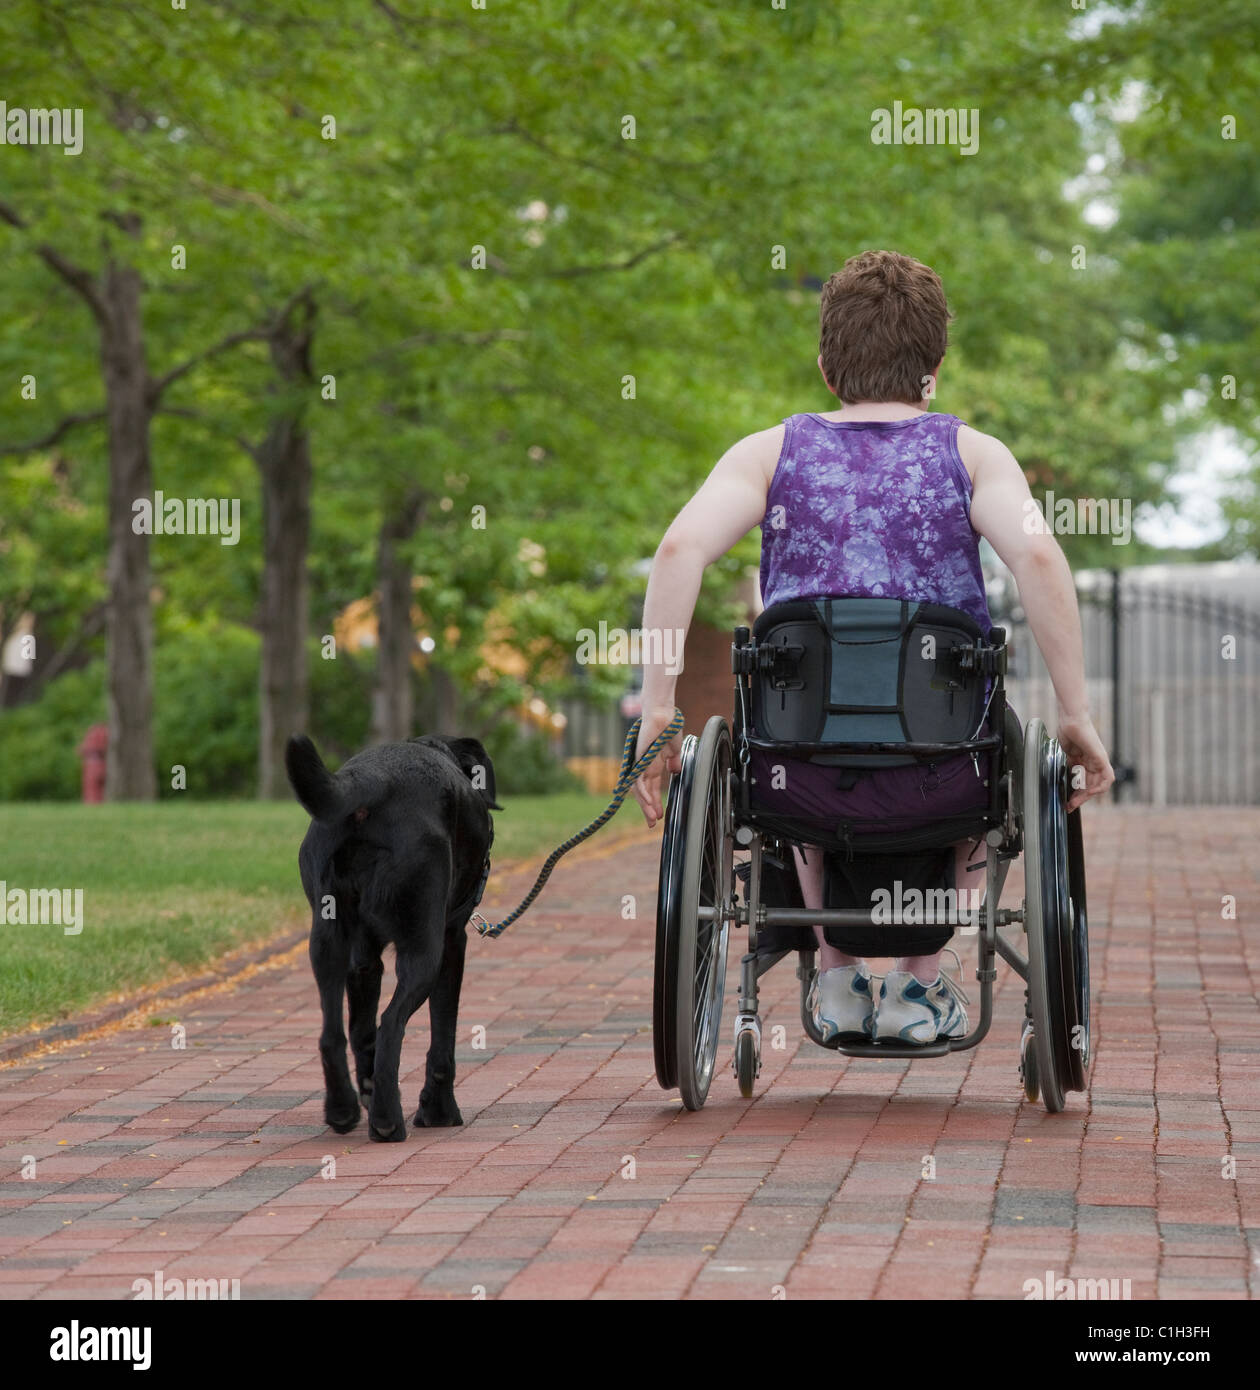 Woman with multiple sclerosis in a park with a service dog Stock Photo